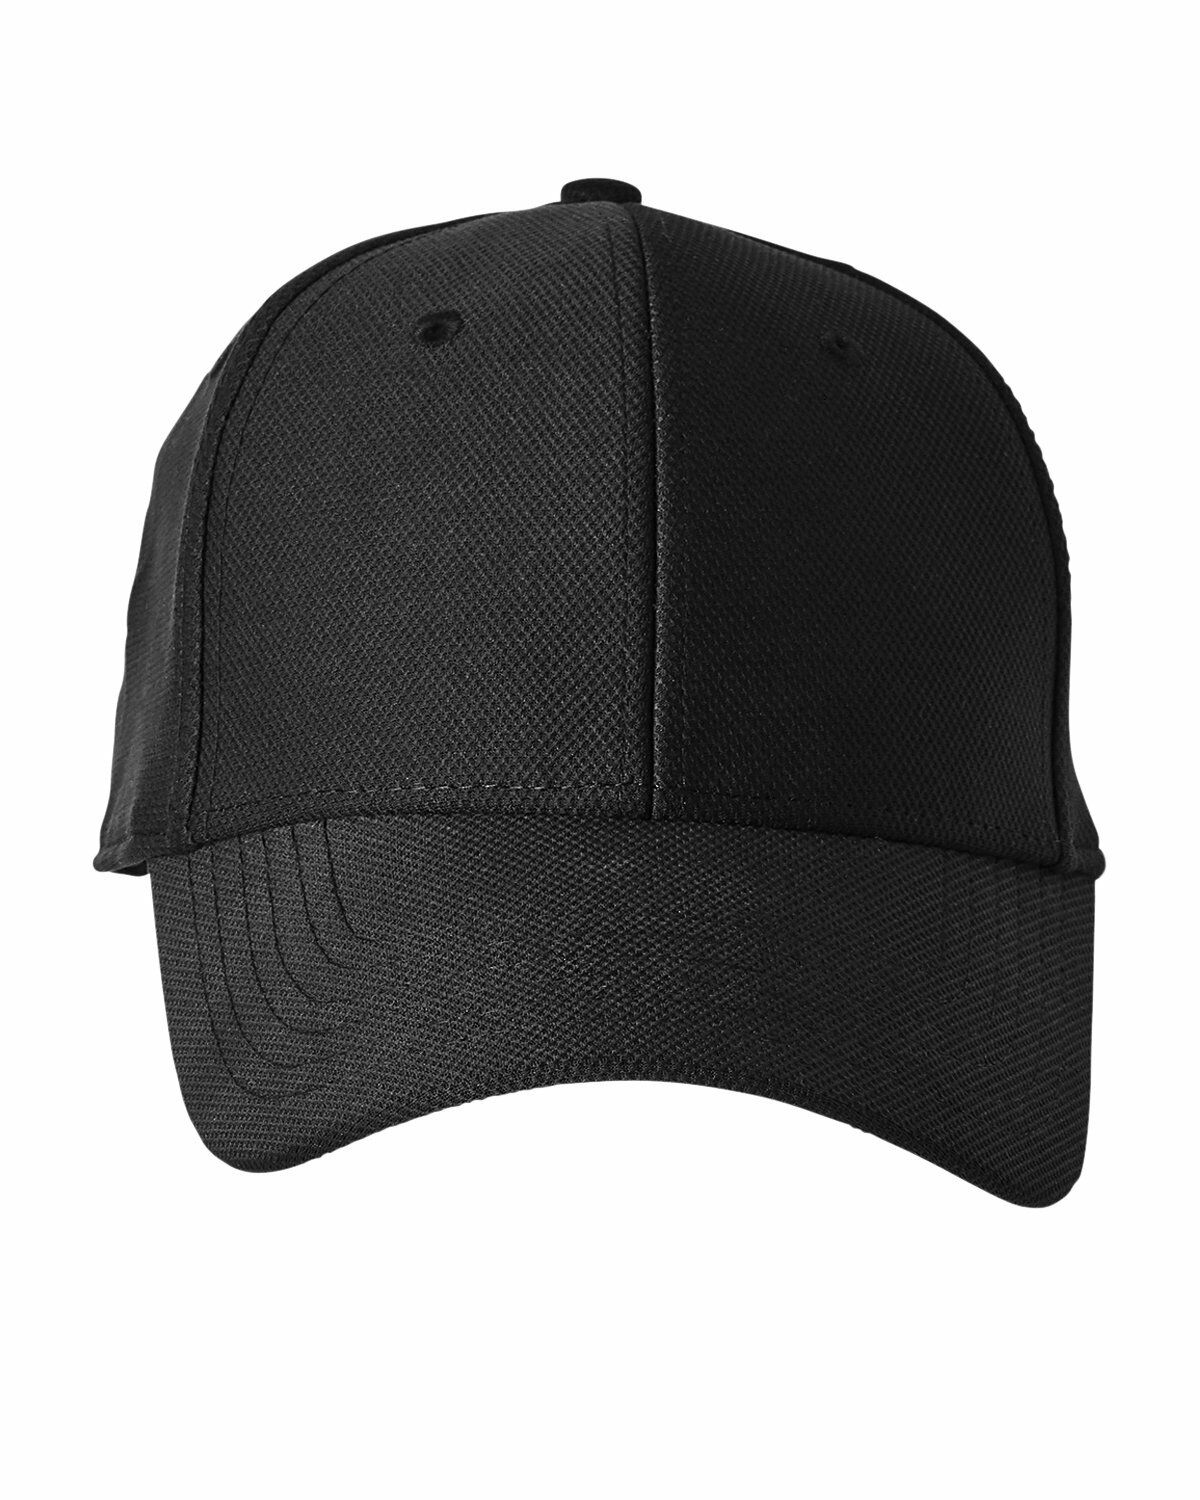 Branded Under Armour Unisex Blitzing Curved Cap Black